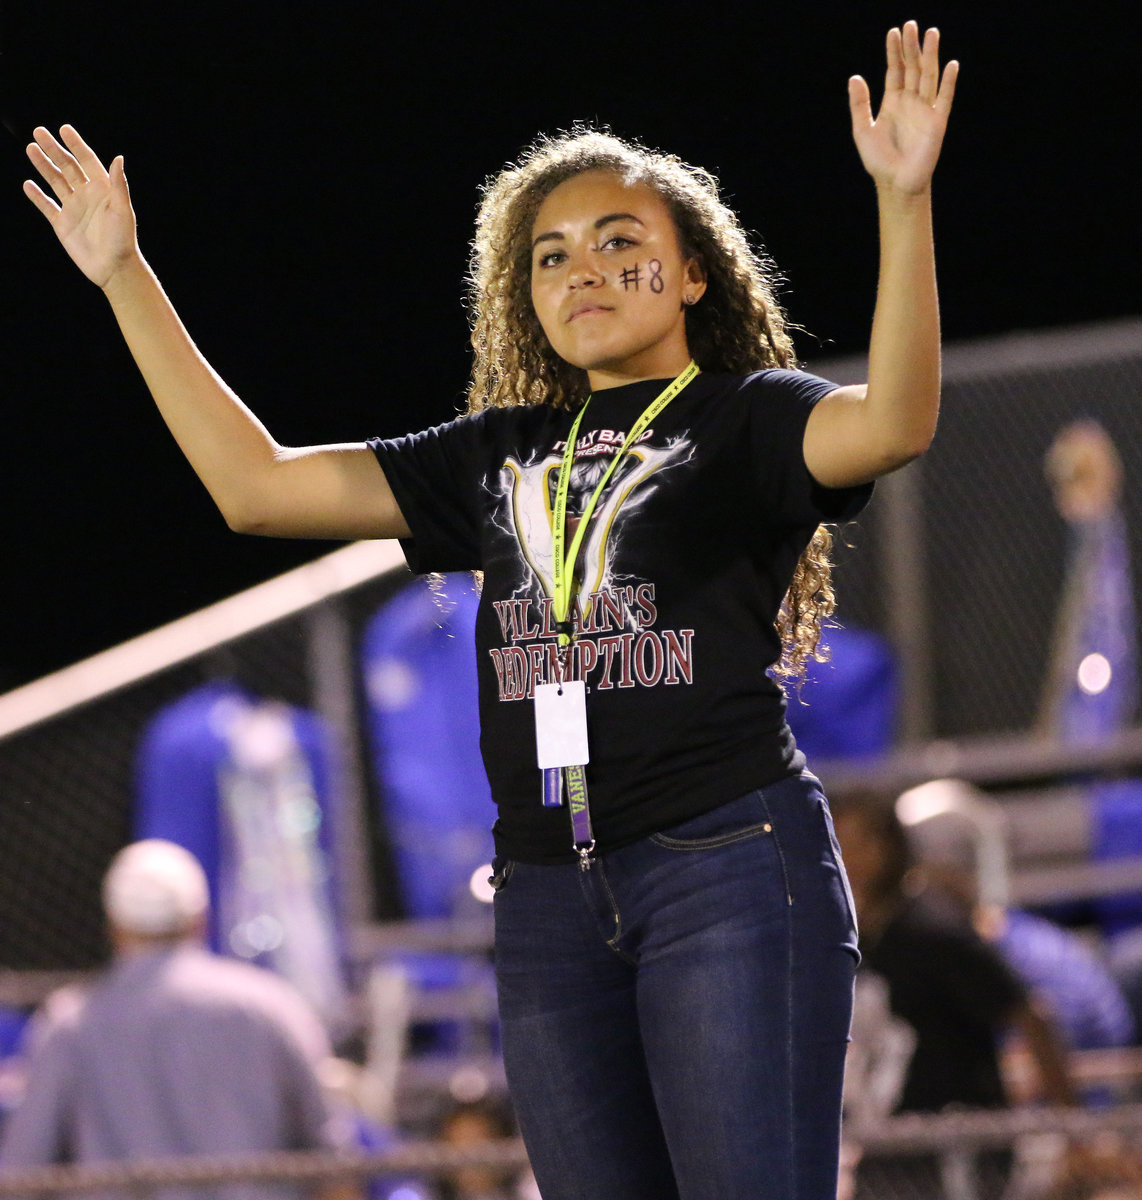 Image: Drum major Vanessa Cantu conducts the Gladiator Regiment Band during halftime.